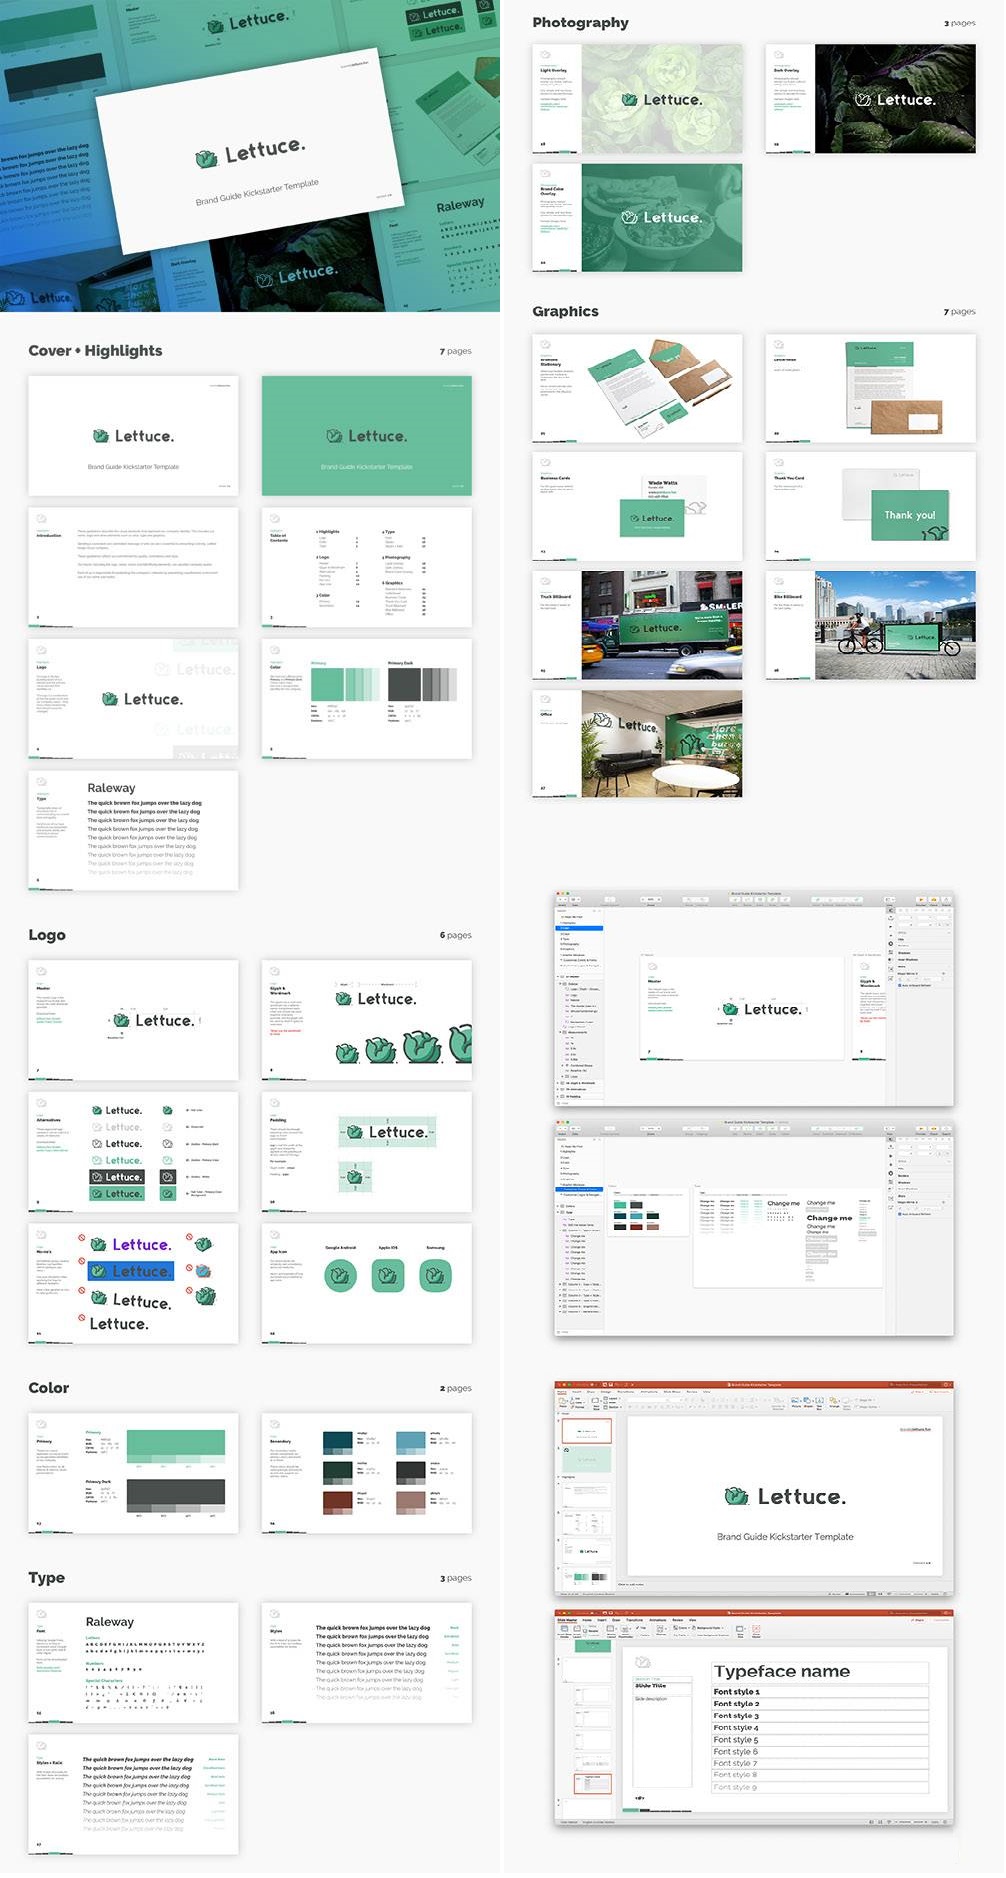 Download Letucce Brand Guide Kickstarter Template Simple & easy to